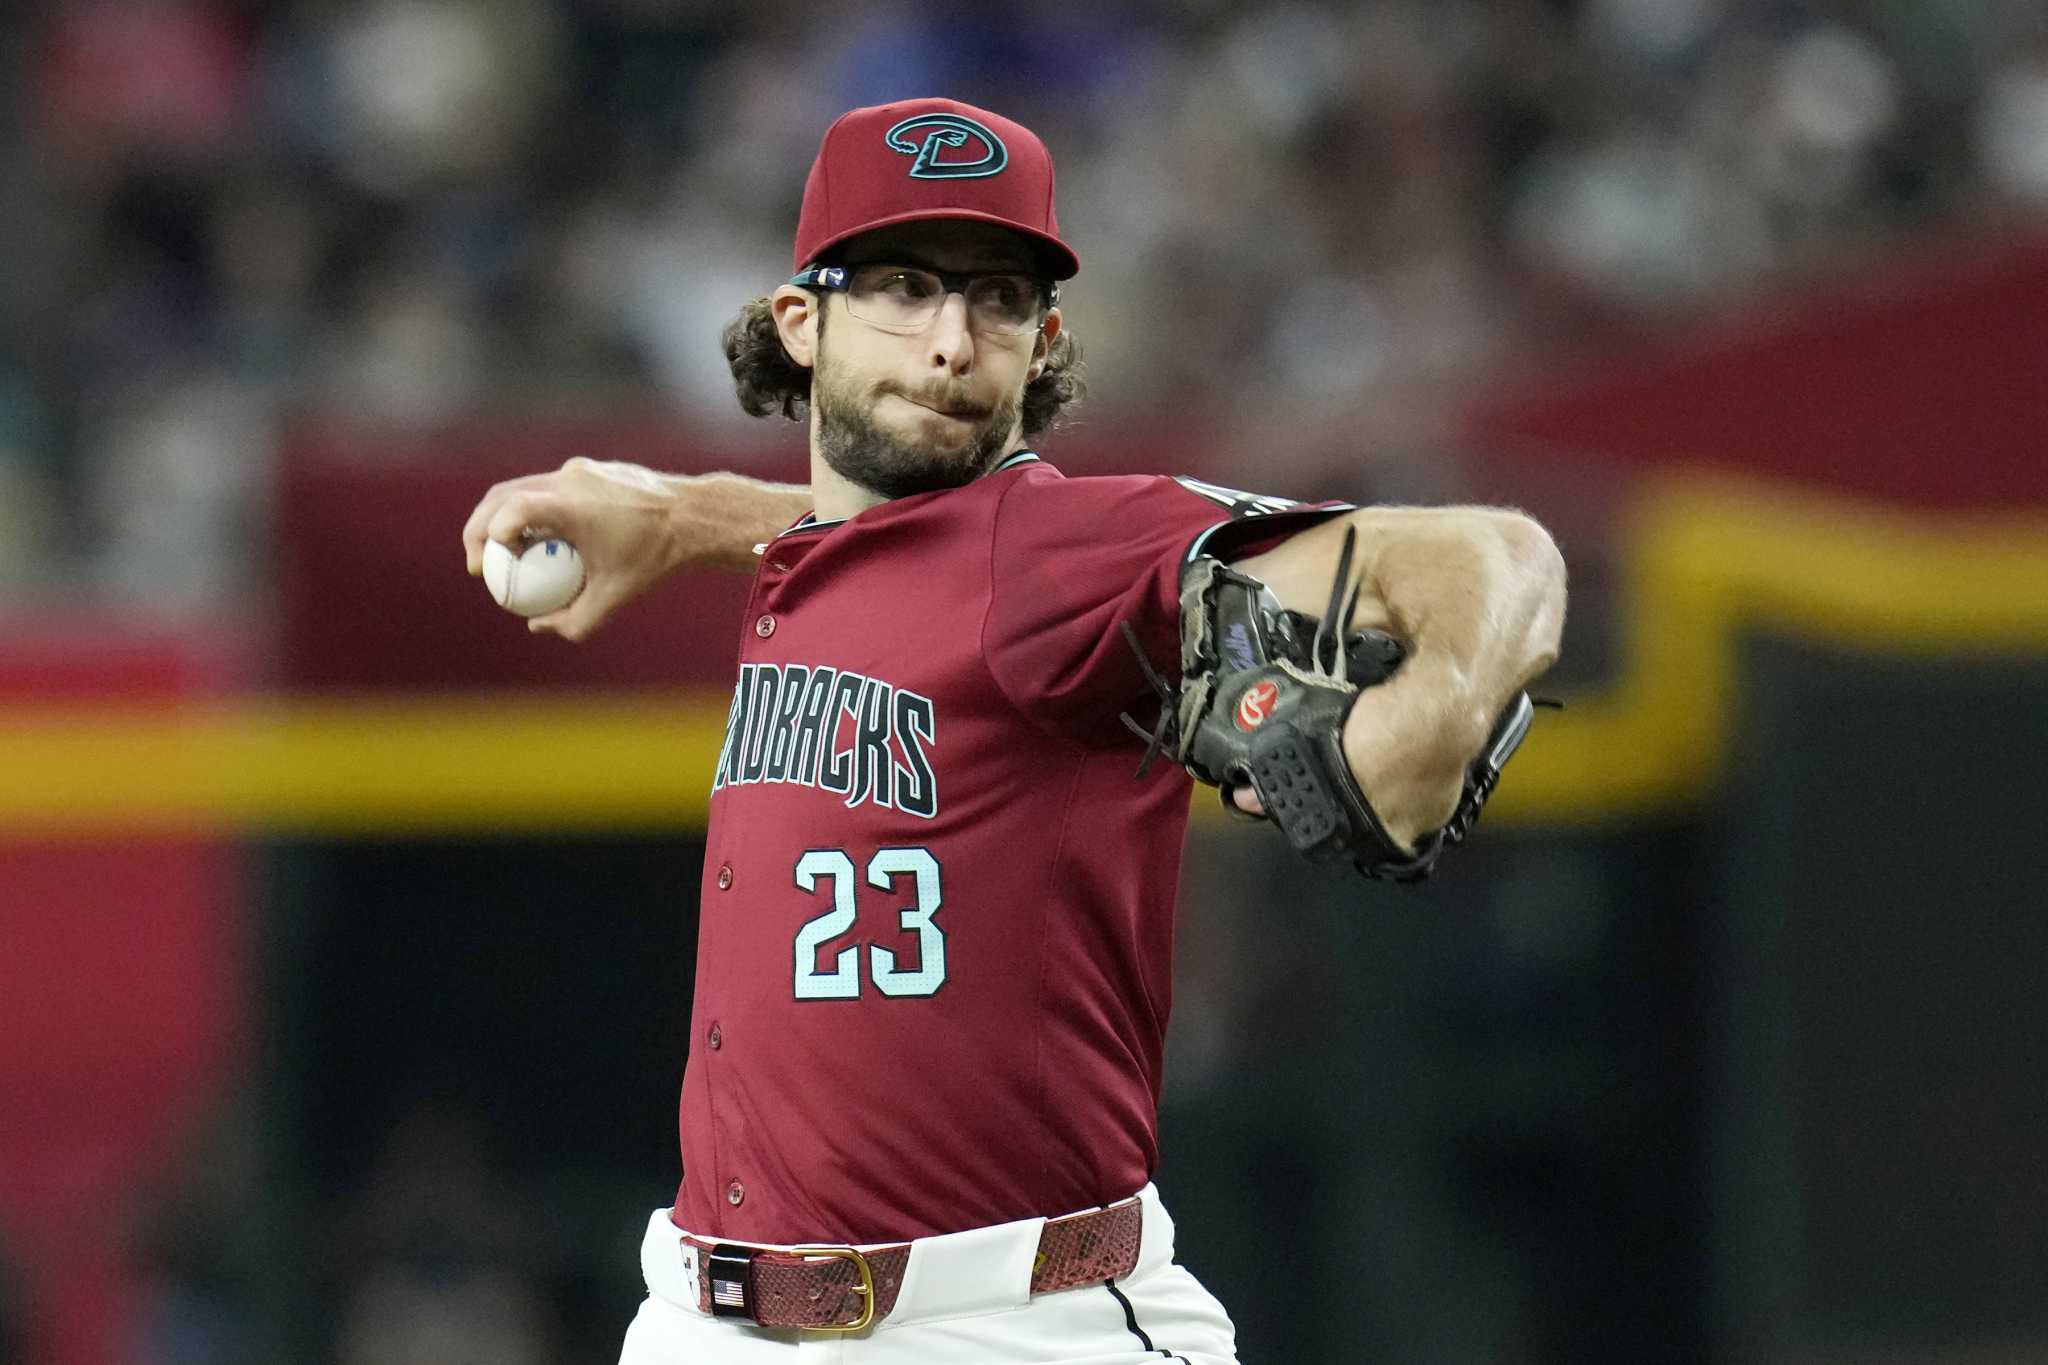 Zac Gallen returns from injured list, holds A's to 1 hit in 6 innings in Diamondbacks' 3-0 win